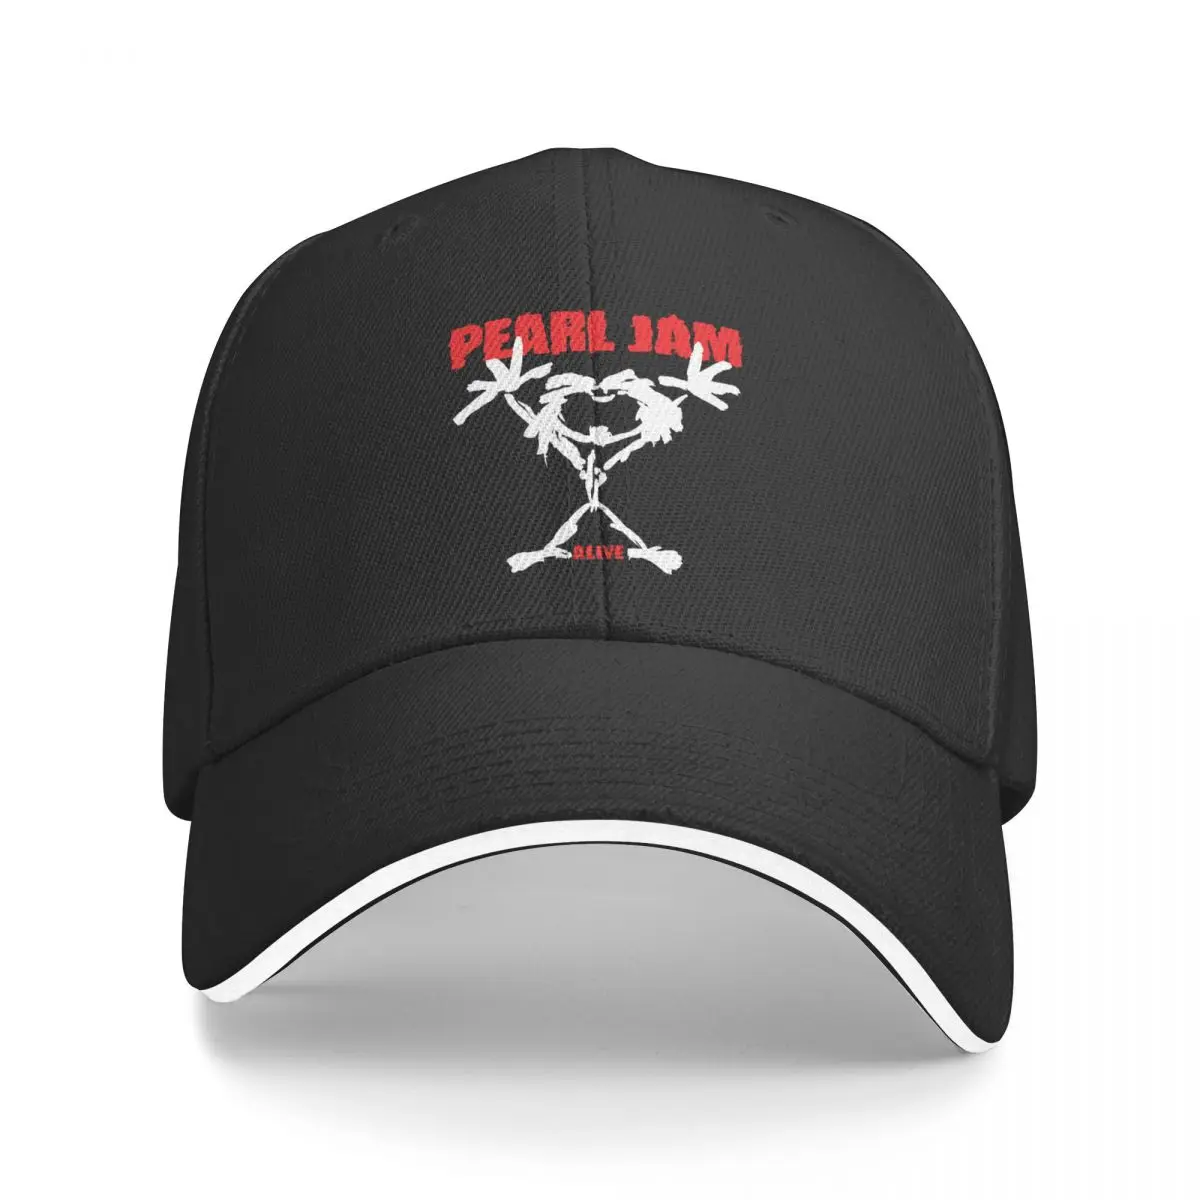 

Pearls Jam Merch Baseball Caps Vintage Classic Rock Band Baseball Cap For for Men Women Casquette Fit All Size